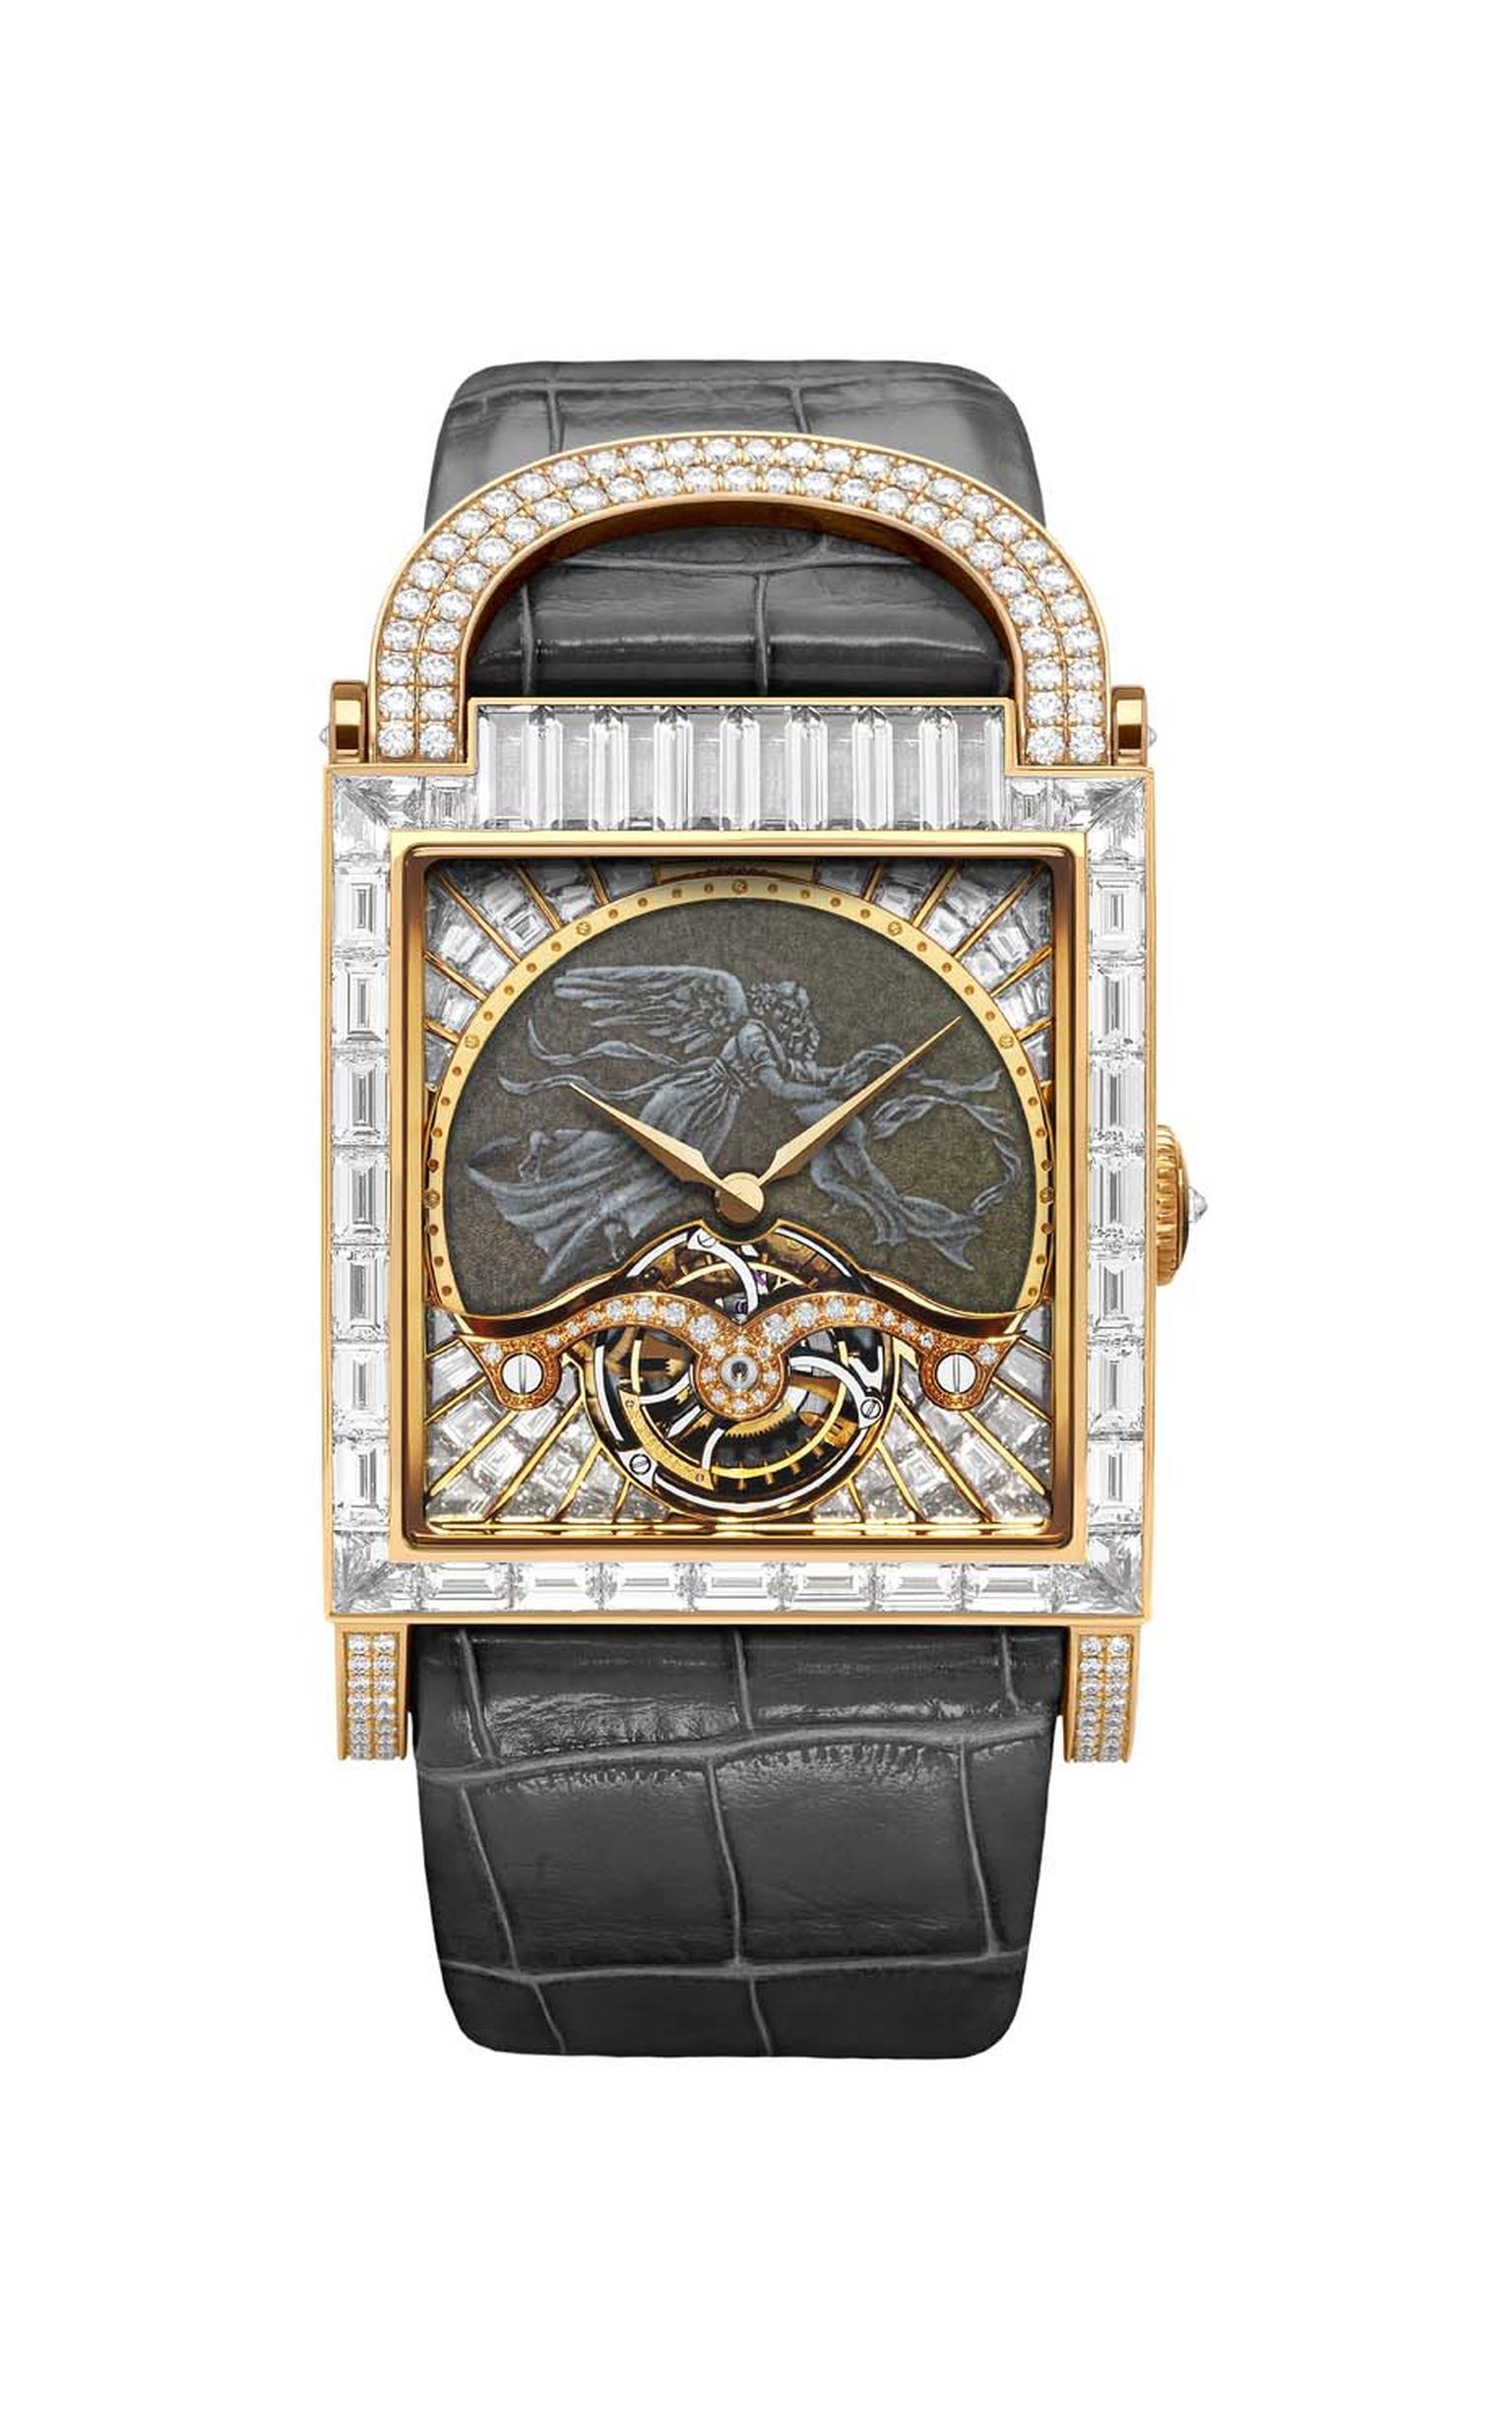 DeLaneau's Angel watch features a grand feu enamel dial depicting an angel, framed by large baguette-cut diamonds. Inside the red gold case is a manual-winding movement that animates the hours, minutes and elegant tourbillon at 6 o'clock.